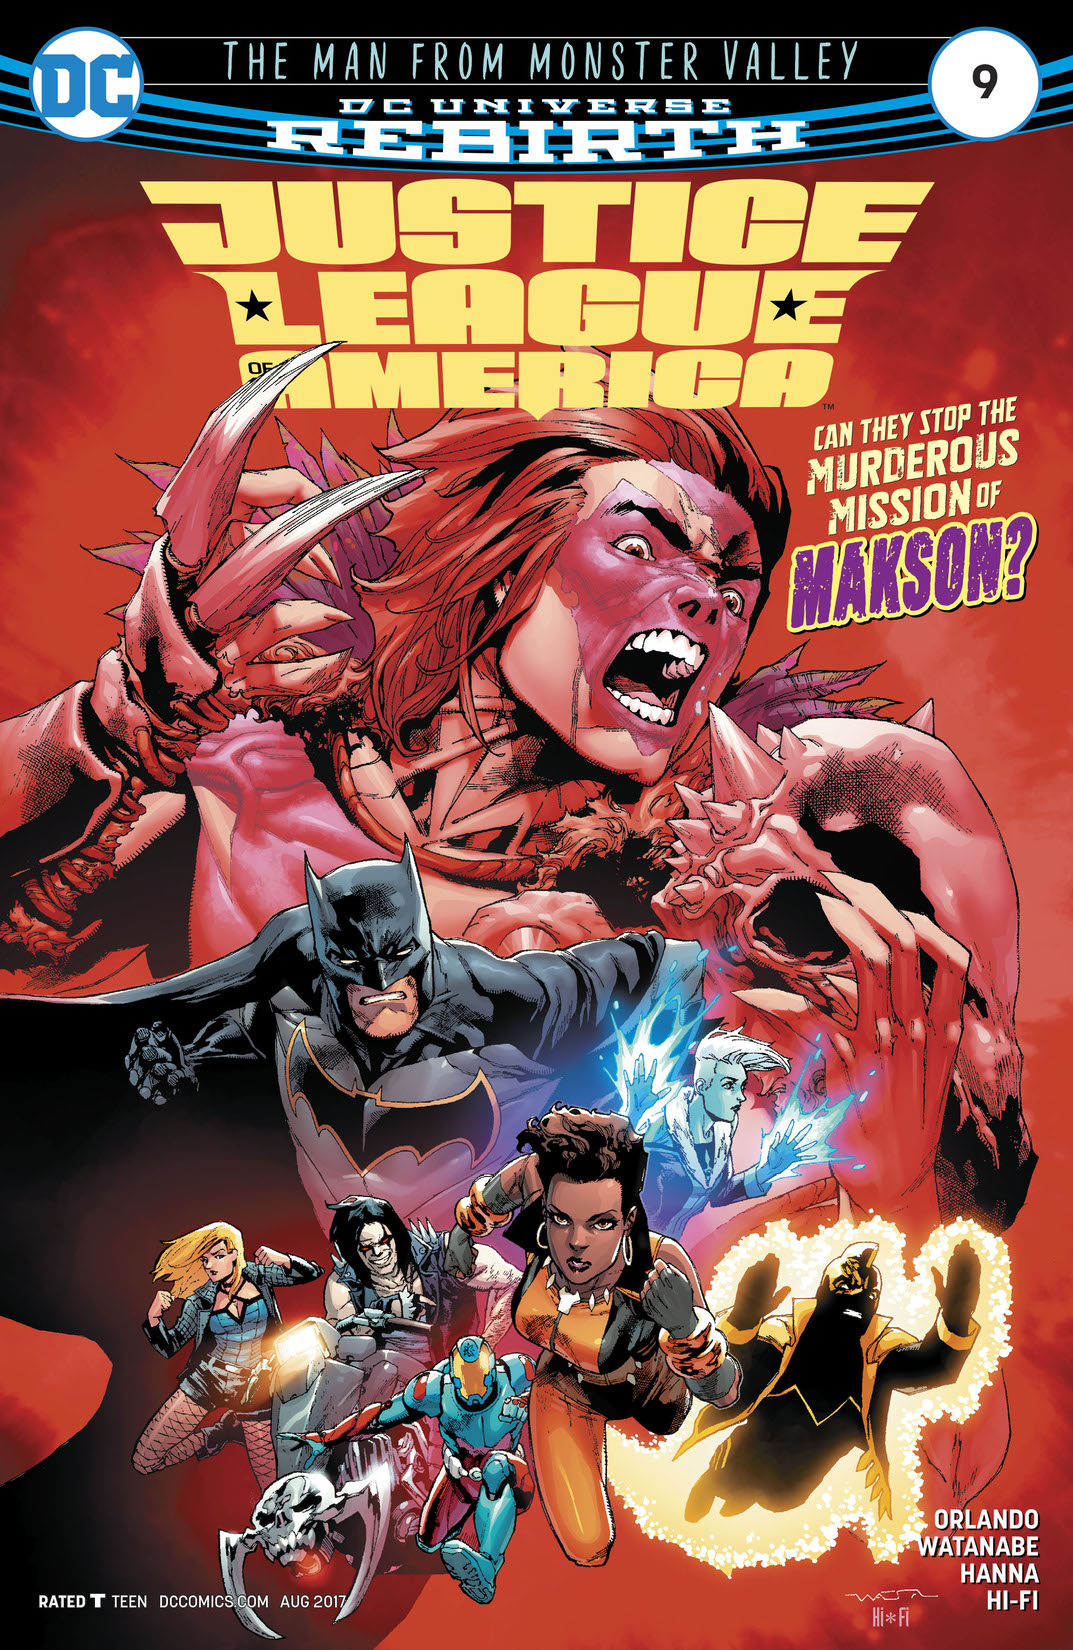 Justice League of America (2017-) #9 preview images